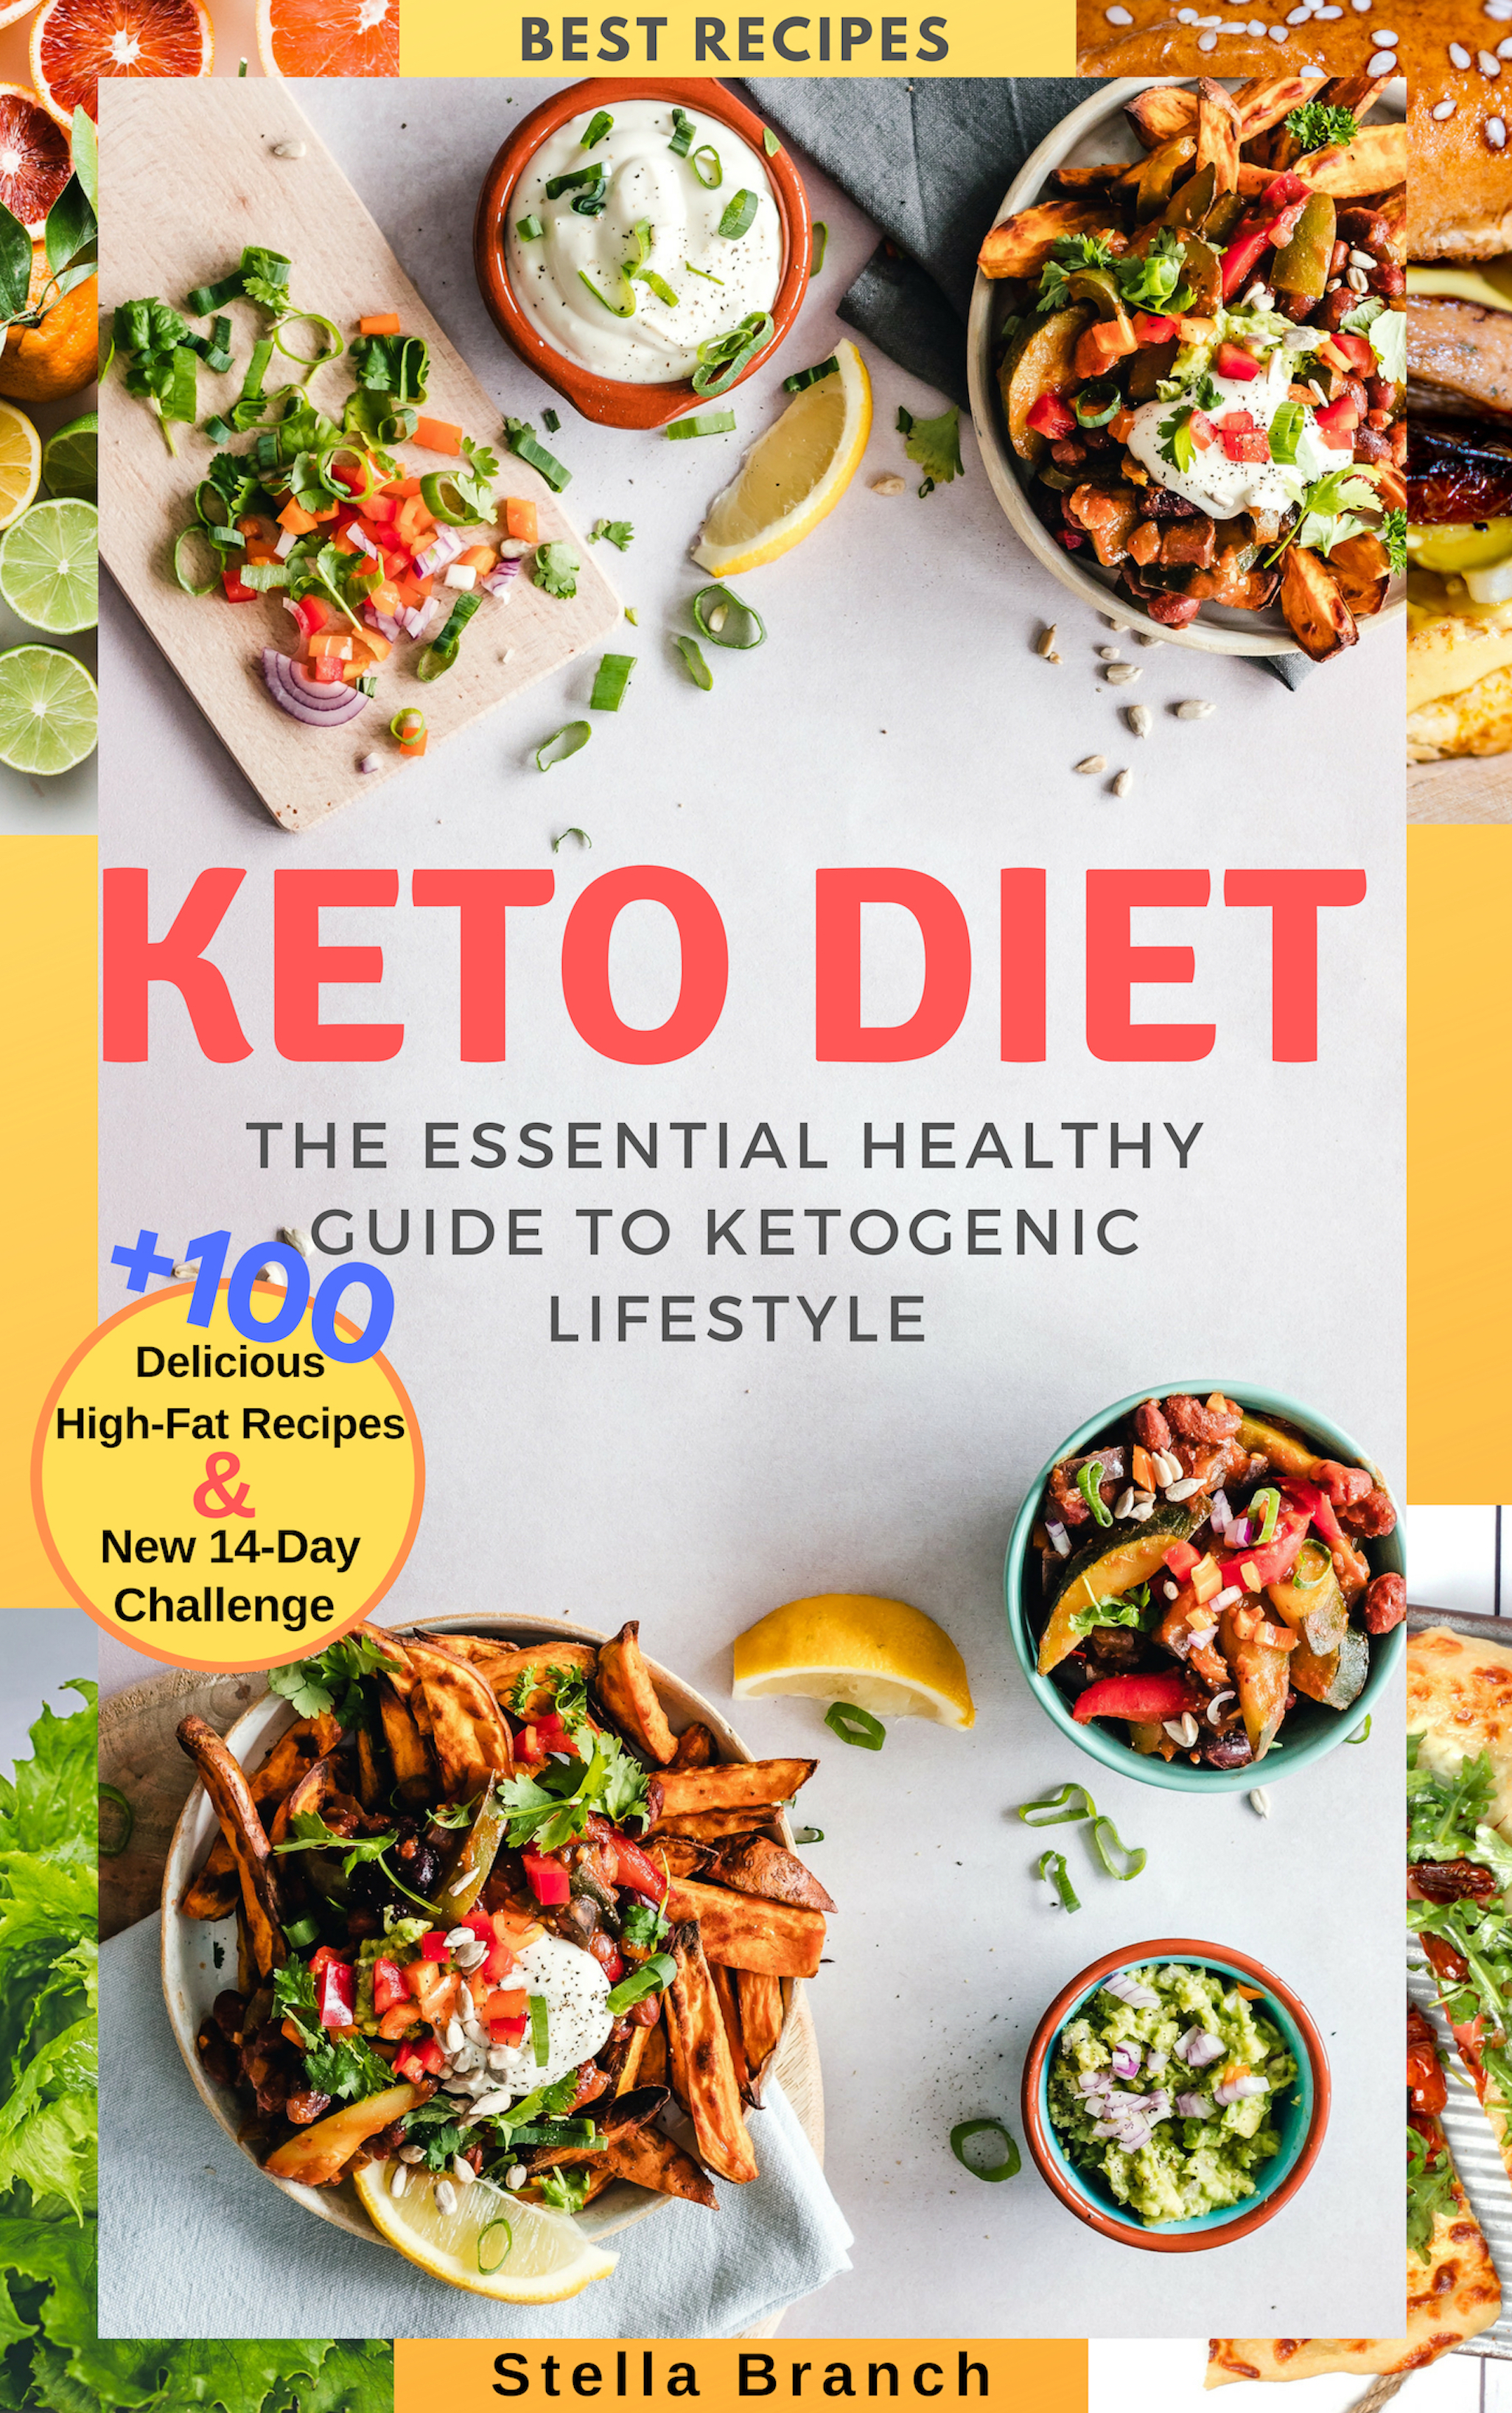 FREE: Keto Diet: The Essential Healthy Guide to Ketogenic Lifestyle, 100+ Delicious High-Fat Recipes & New 14-day Challenge by STELLA BRANCH